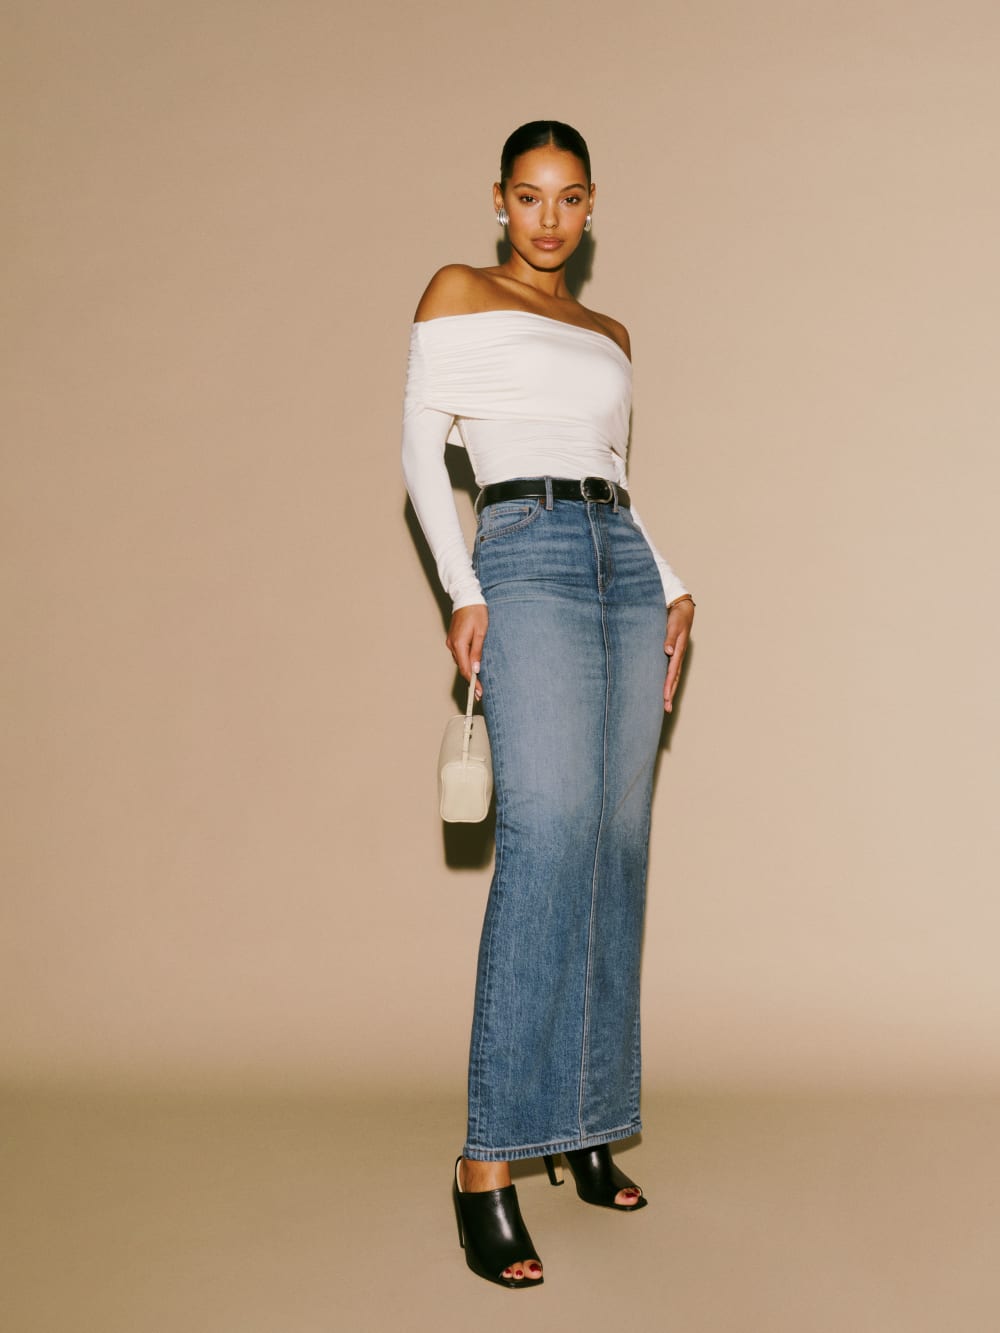 Reformation Daria high rise blue denim maxi skirt with 5 pockets, belt loops, button and zip fly. Fitted with a back slit. 